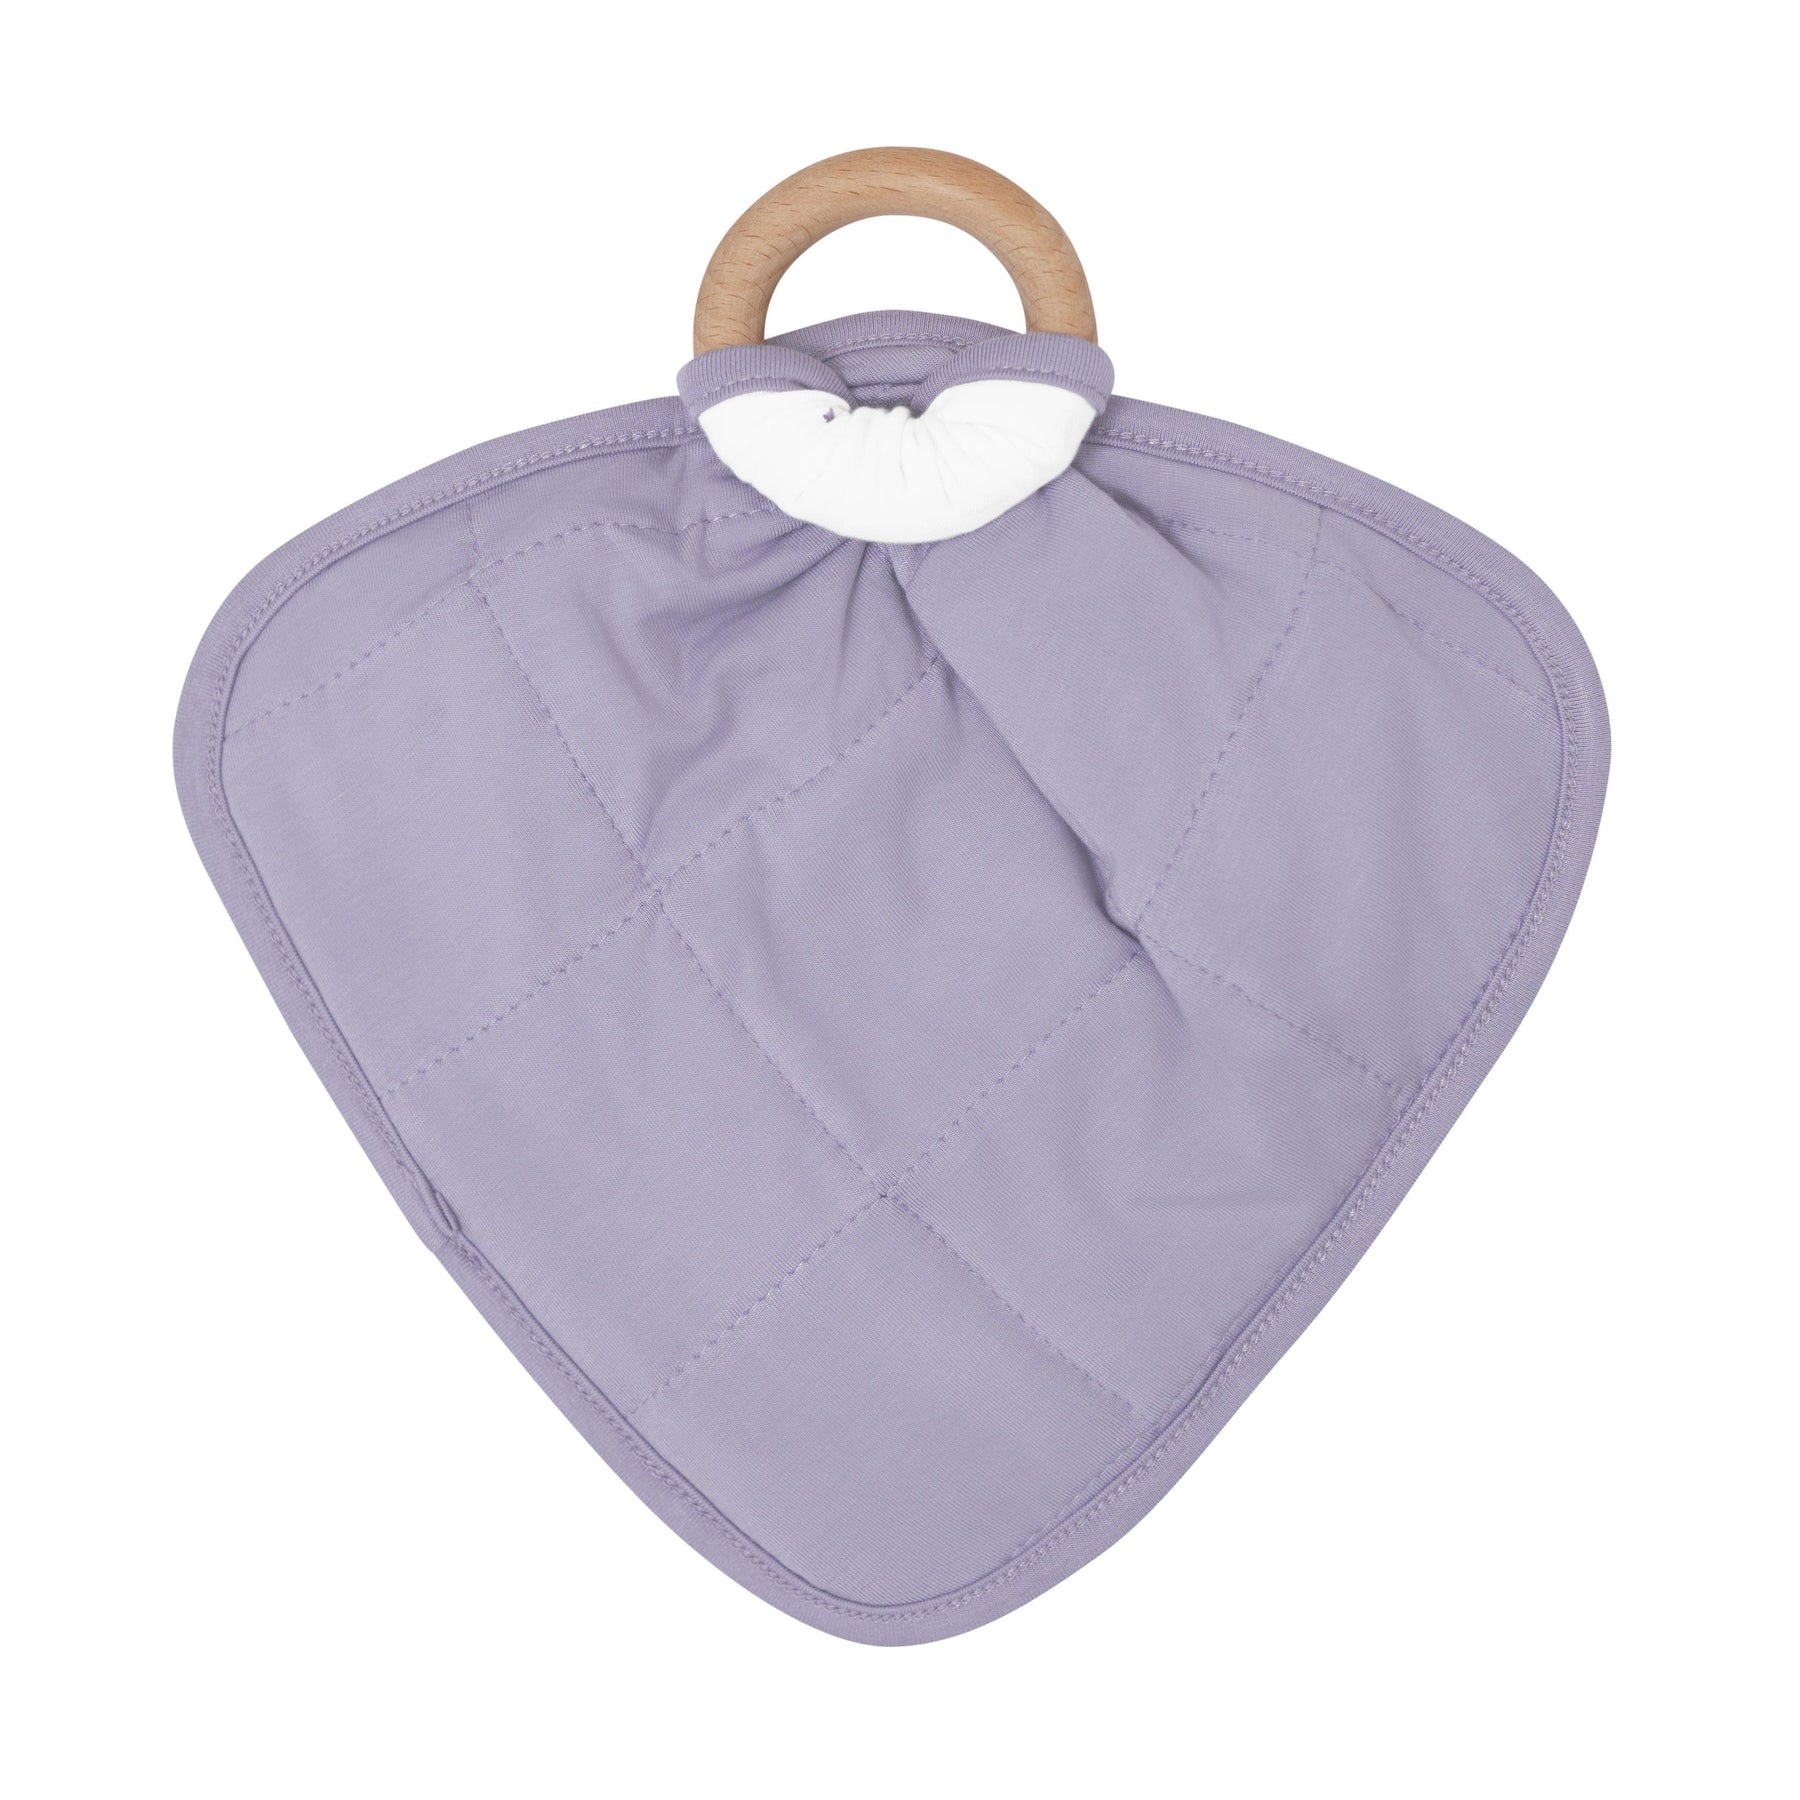 Kyte Baby Lovey Lavender / Infant Lovey in Lavender with Removable Wooden Teething Ring